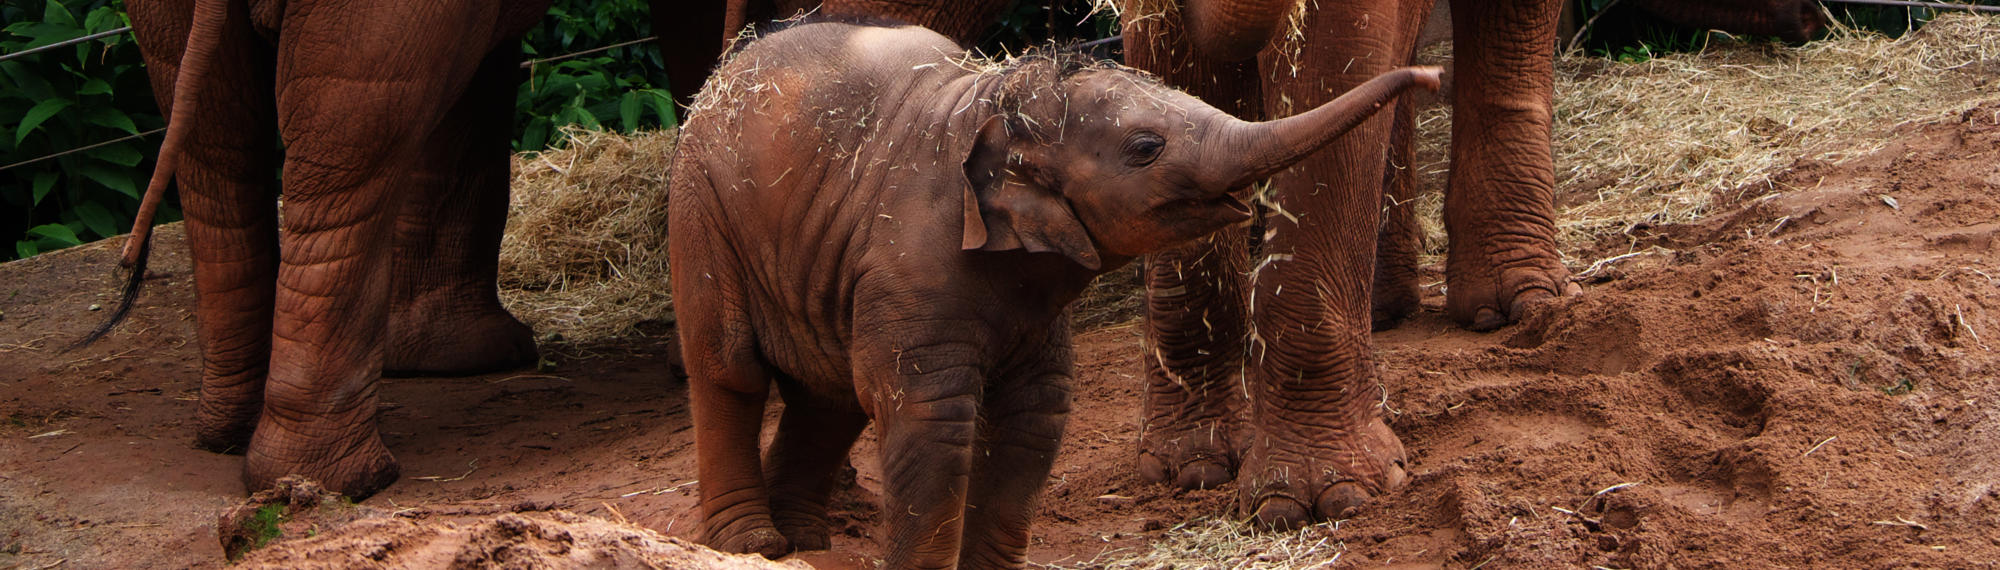 A young Asian Elephant calf is standing on red dirt, with it's trunk high in the air.